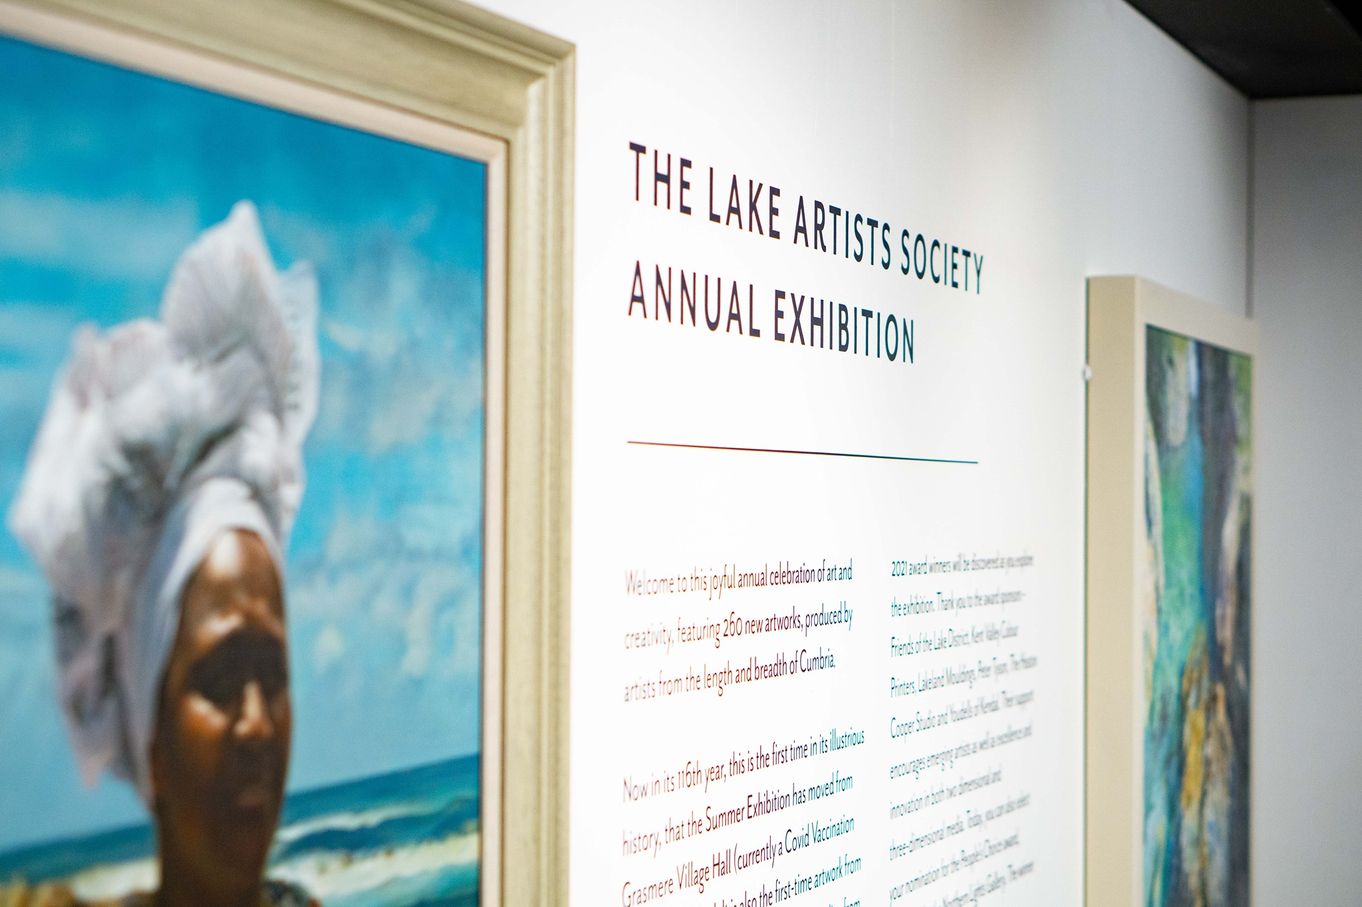 The Lake Artists Society Annual Exhibition 